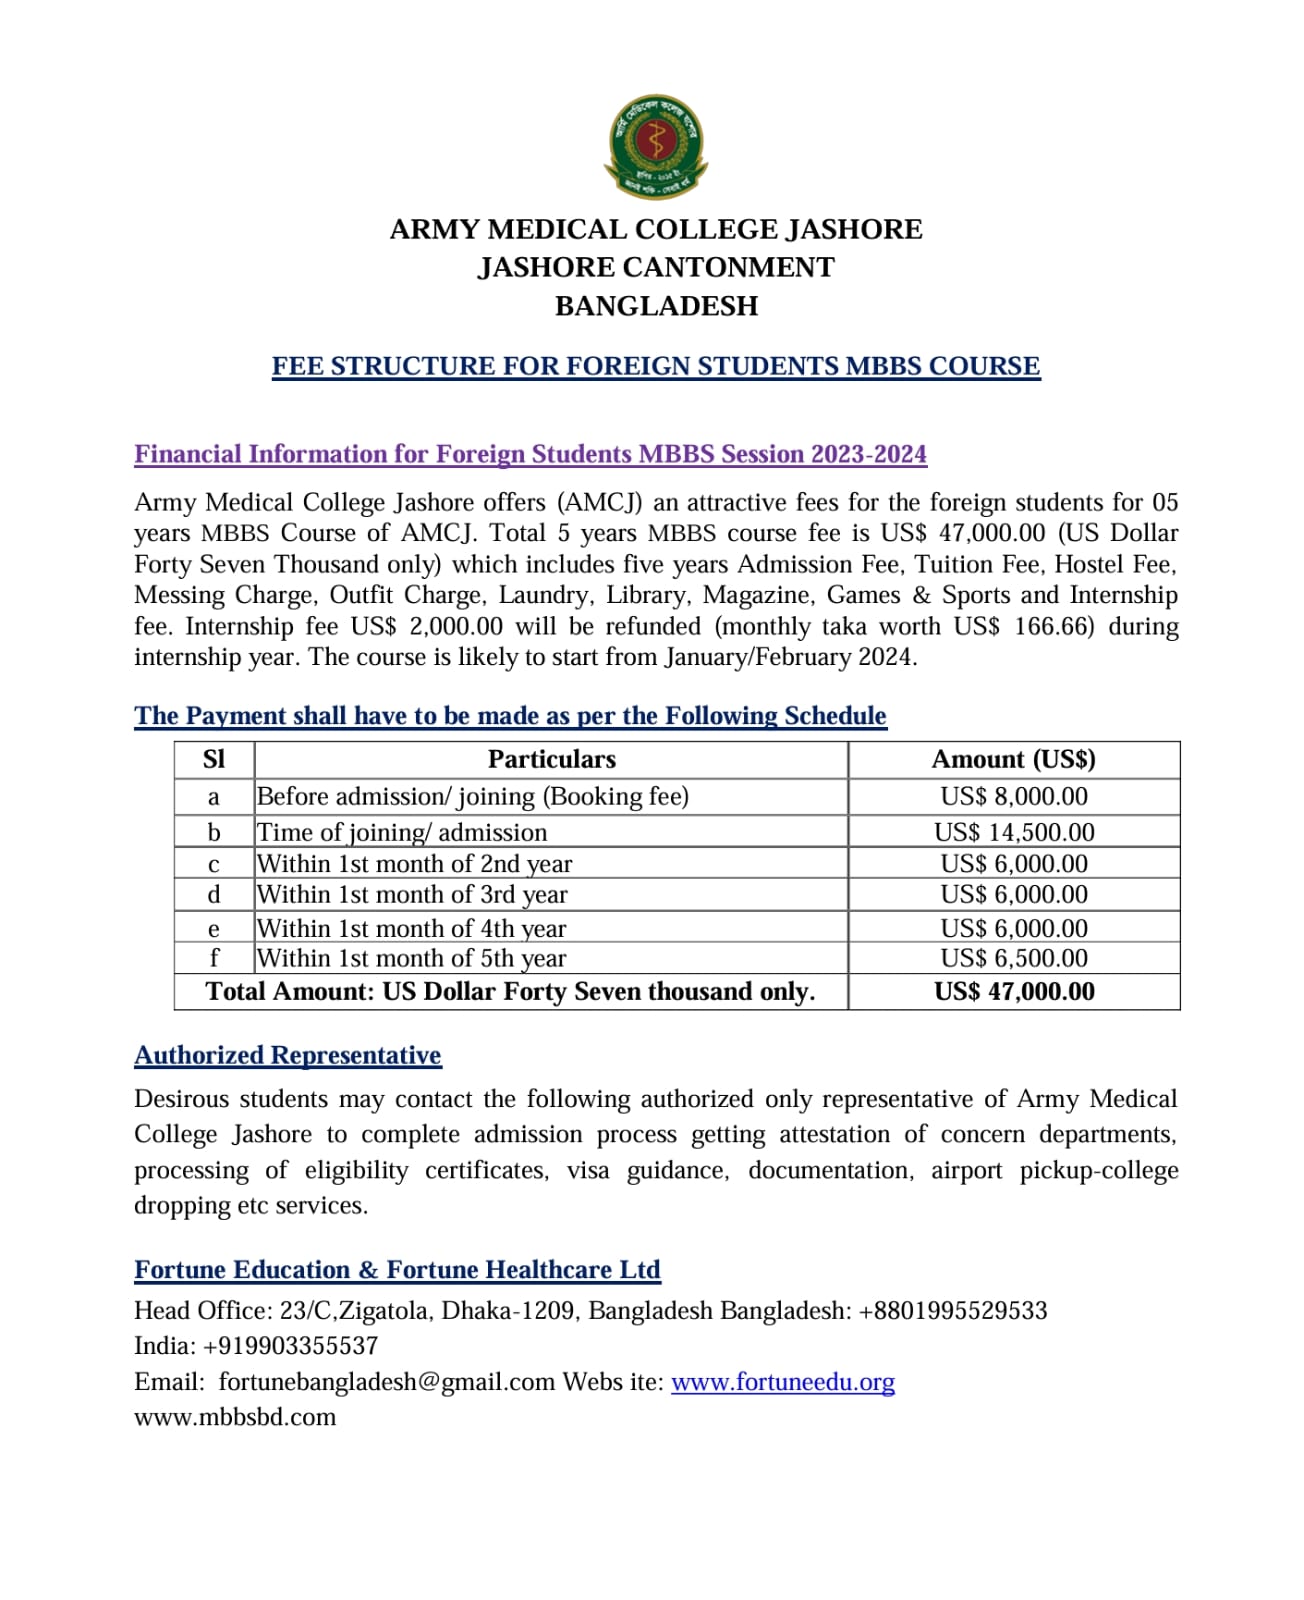 MBBS Fees Structure of Army Medical College